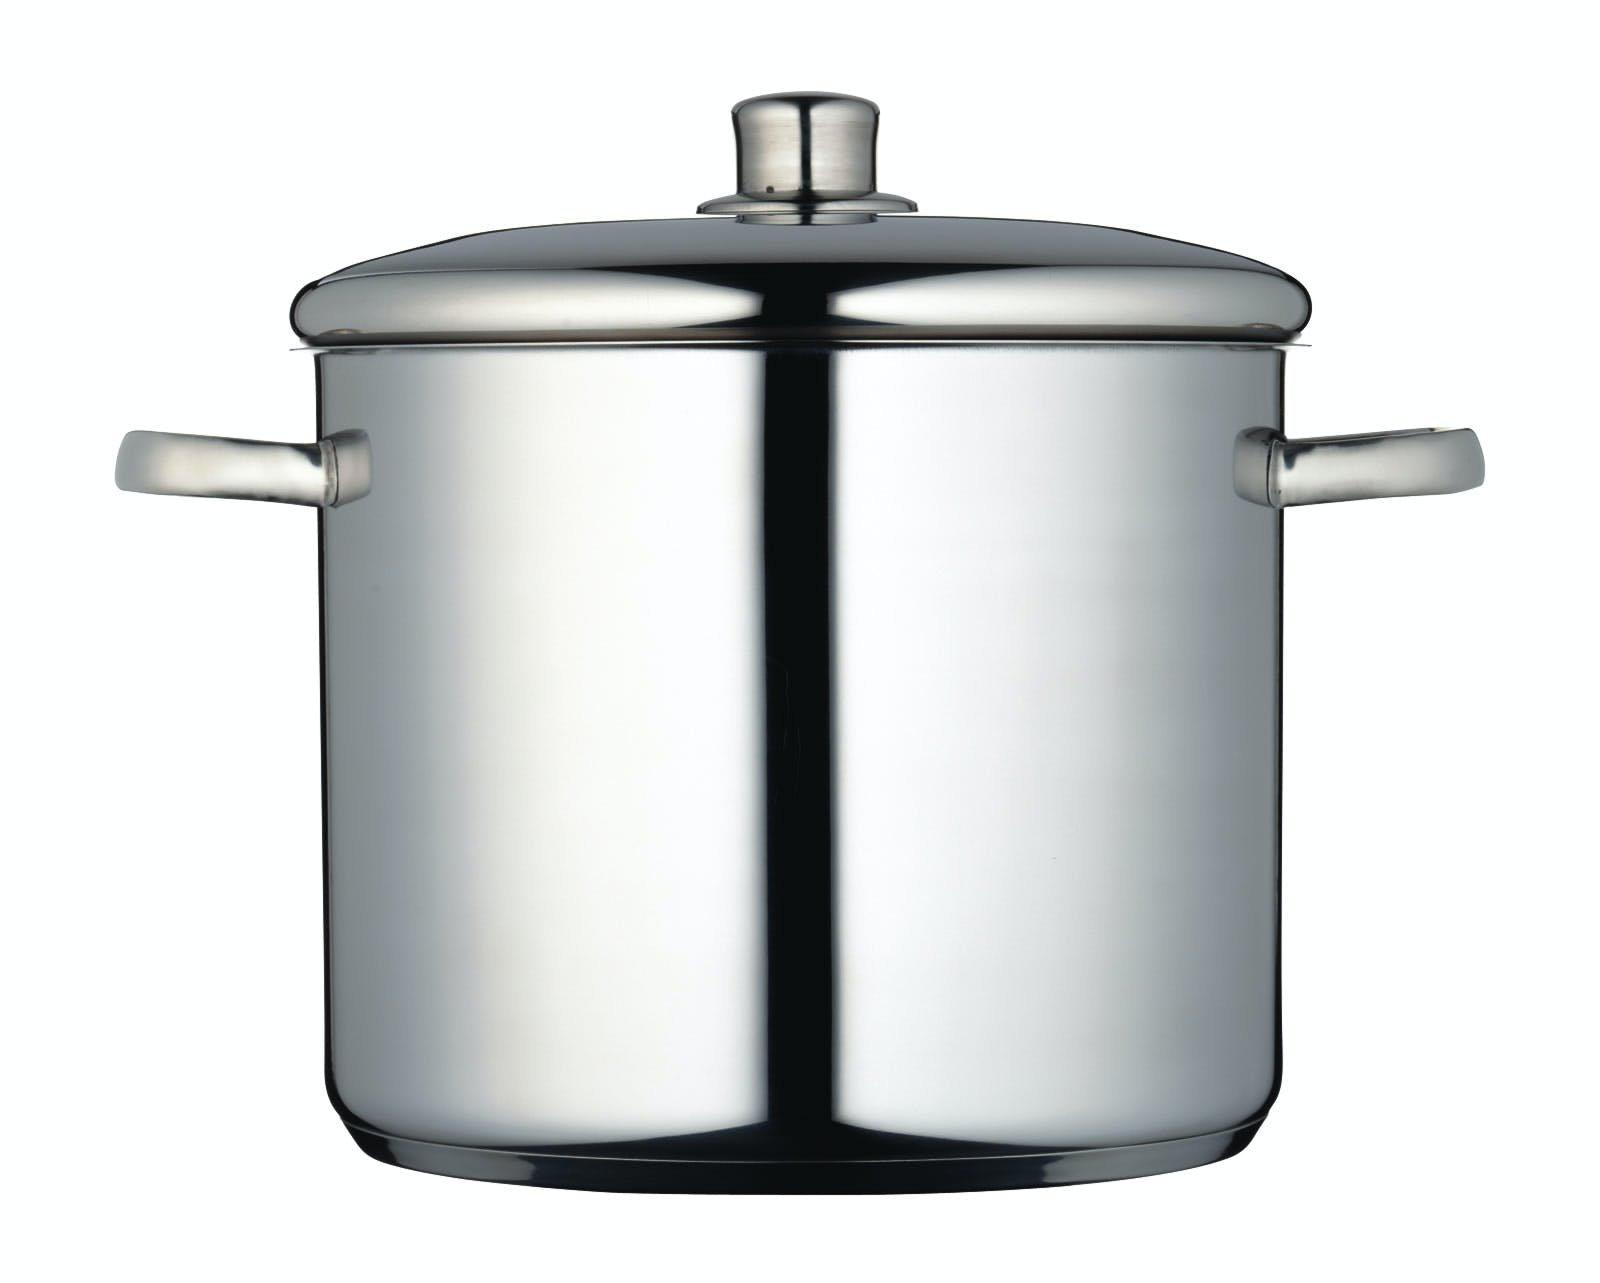 Stainless Steel Stockpot 26cm (11 Litres), Labelled